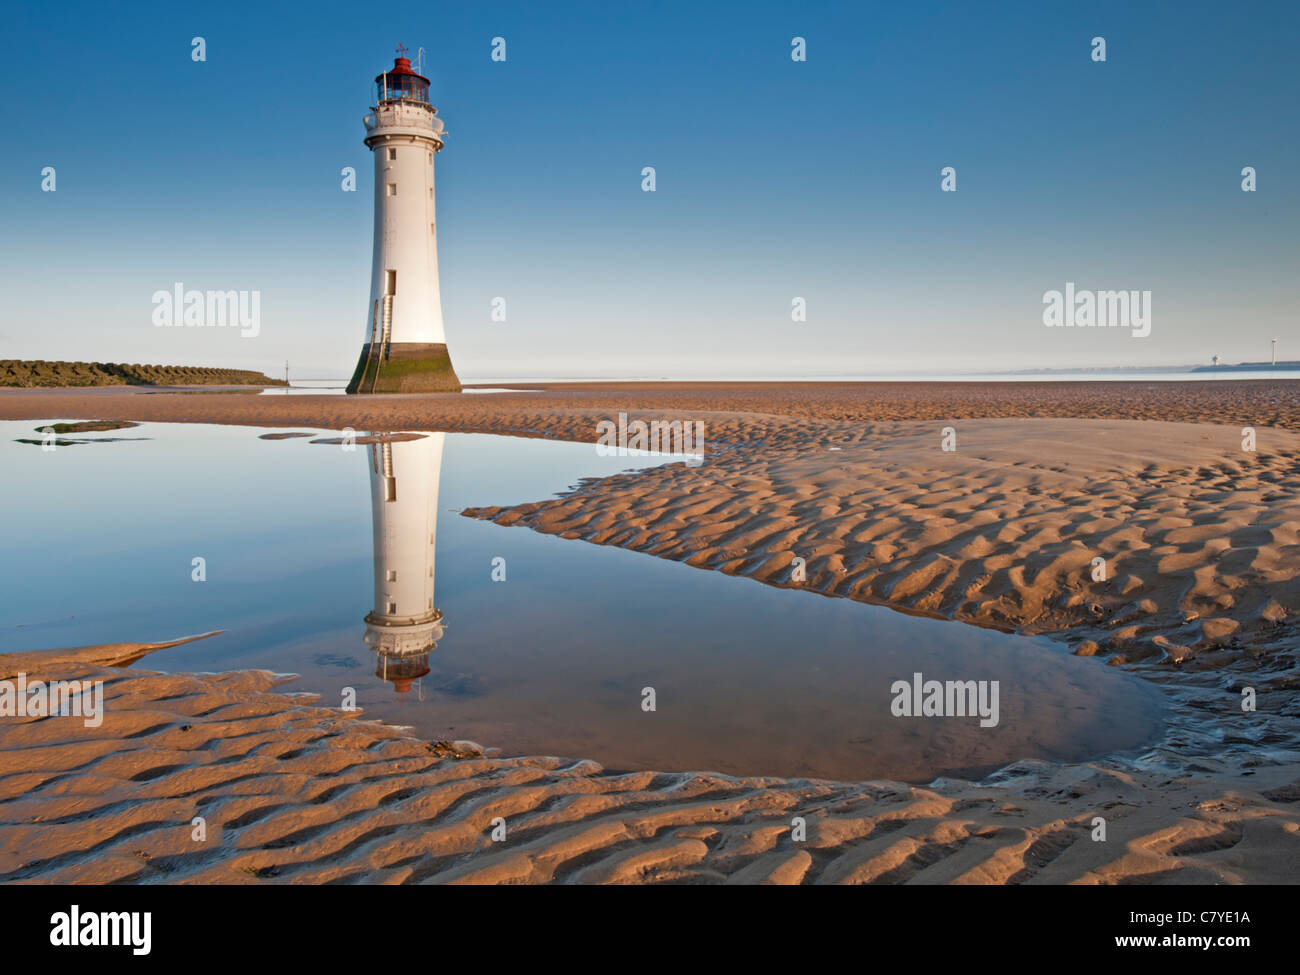 Perchaude Rock Lighthouse, New Brighton, le Wirral, Merseyside, England, UK Banque D'Images